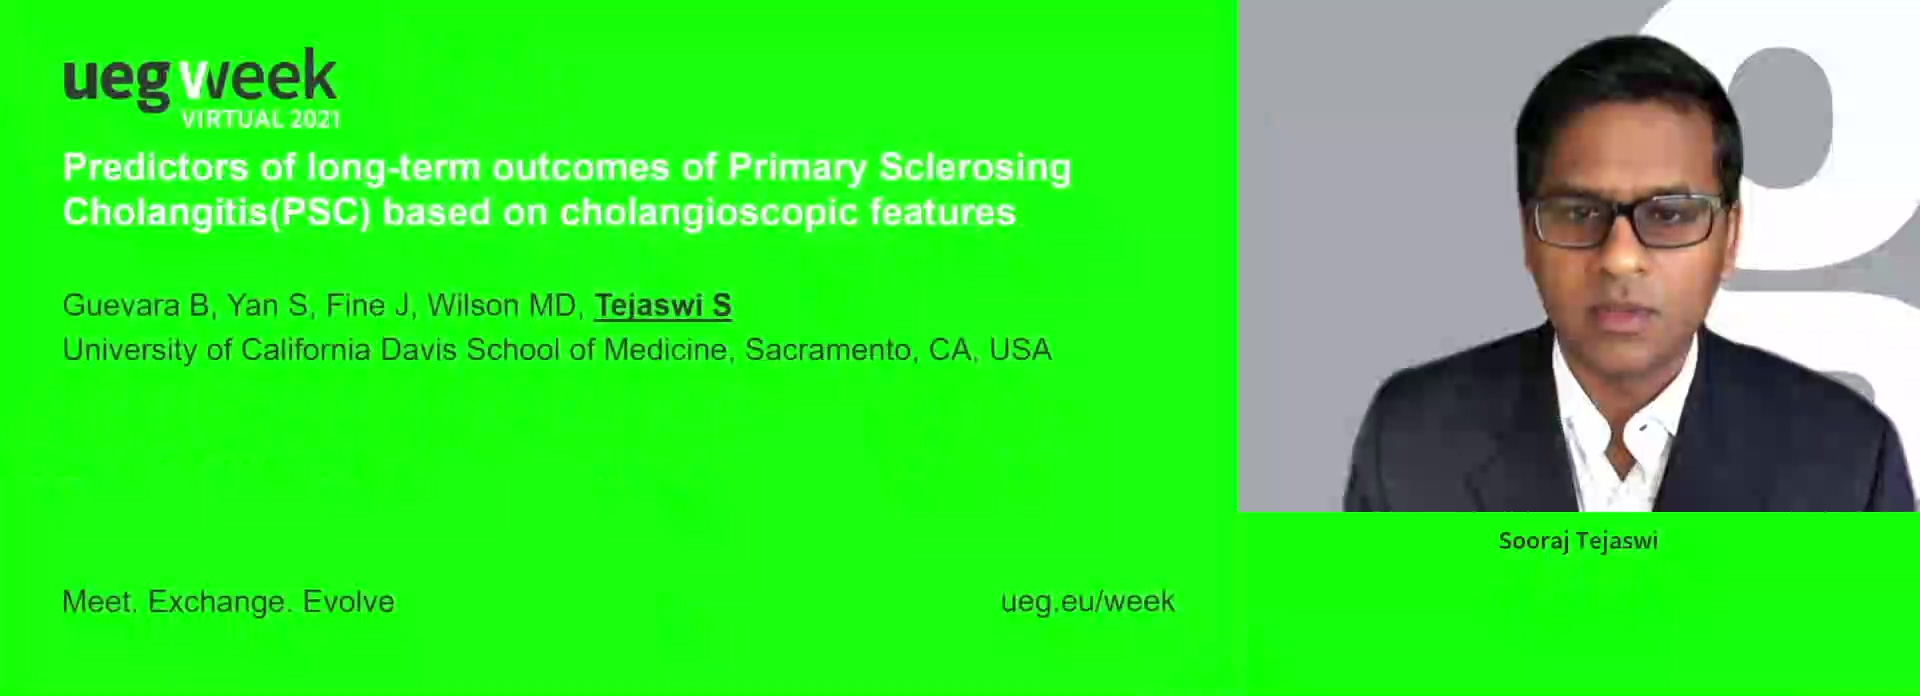 PREDICTORS OF LONG-TERM OUTCOMES OF PRIMARY SCLEROSING CHOLANGITIS BASED ON CHOLANGIOSCOPIC FEATURES